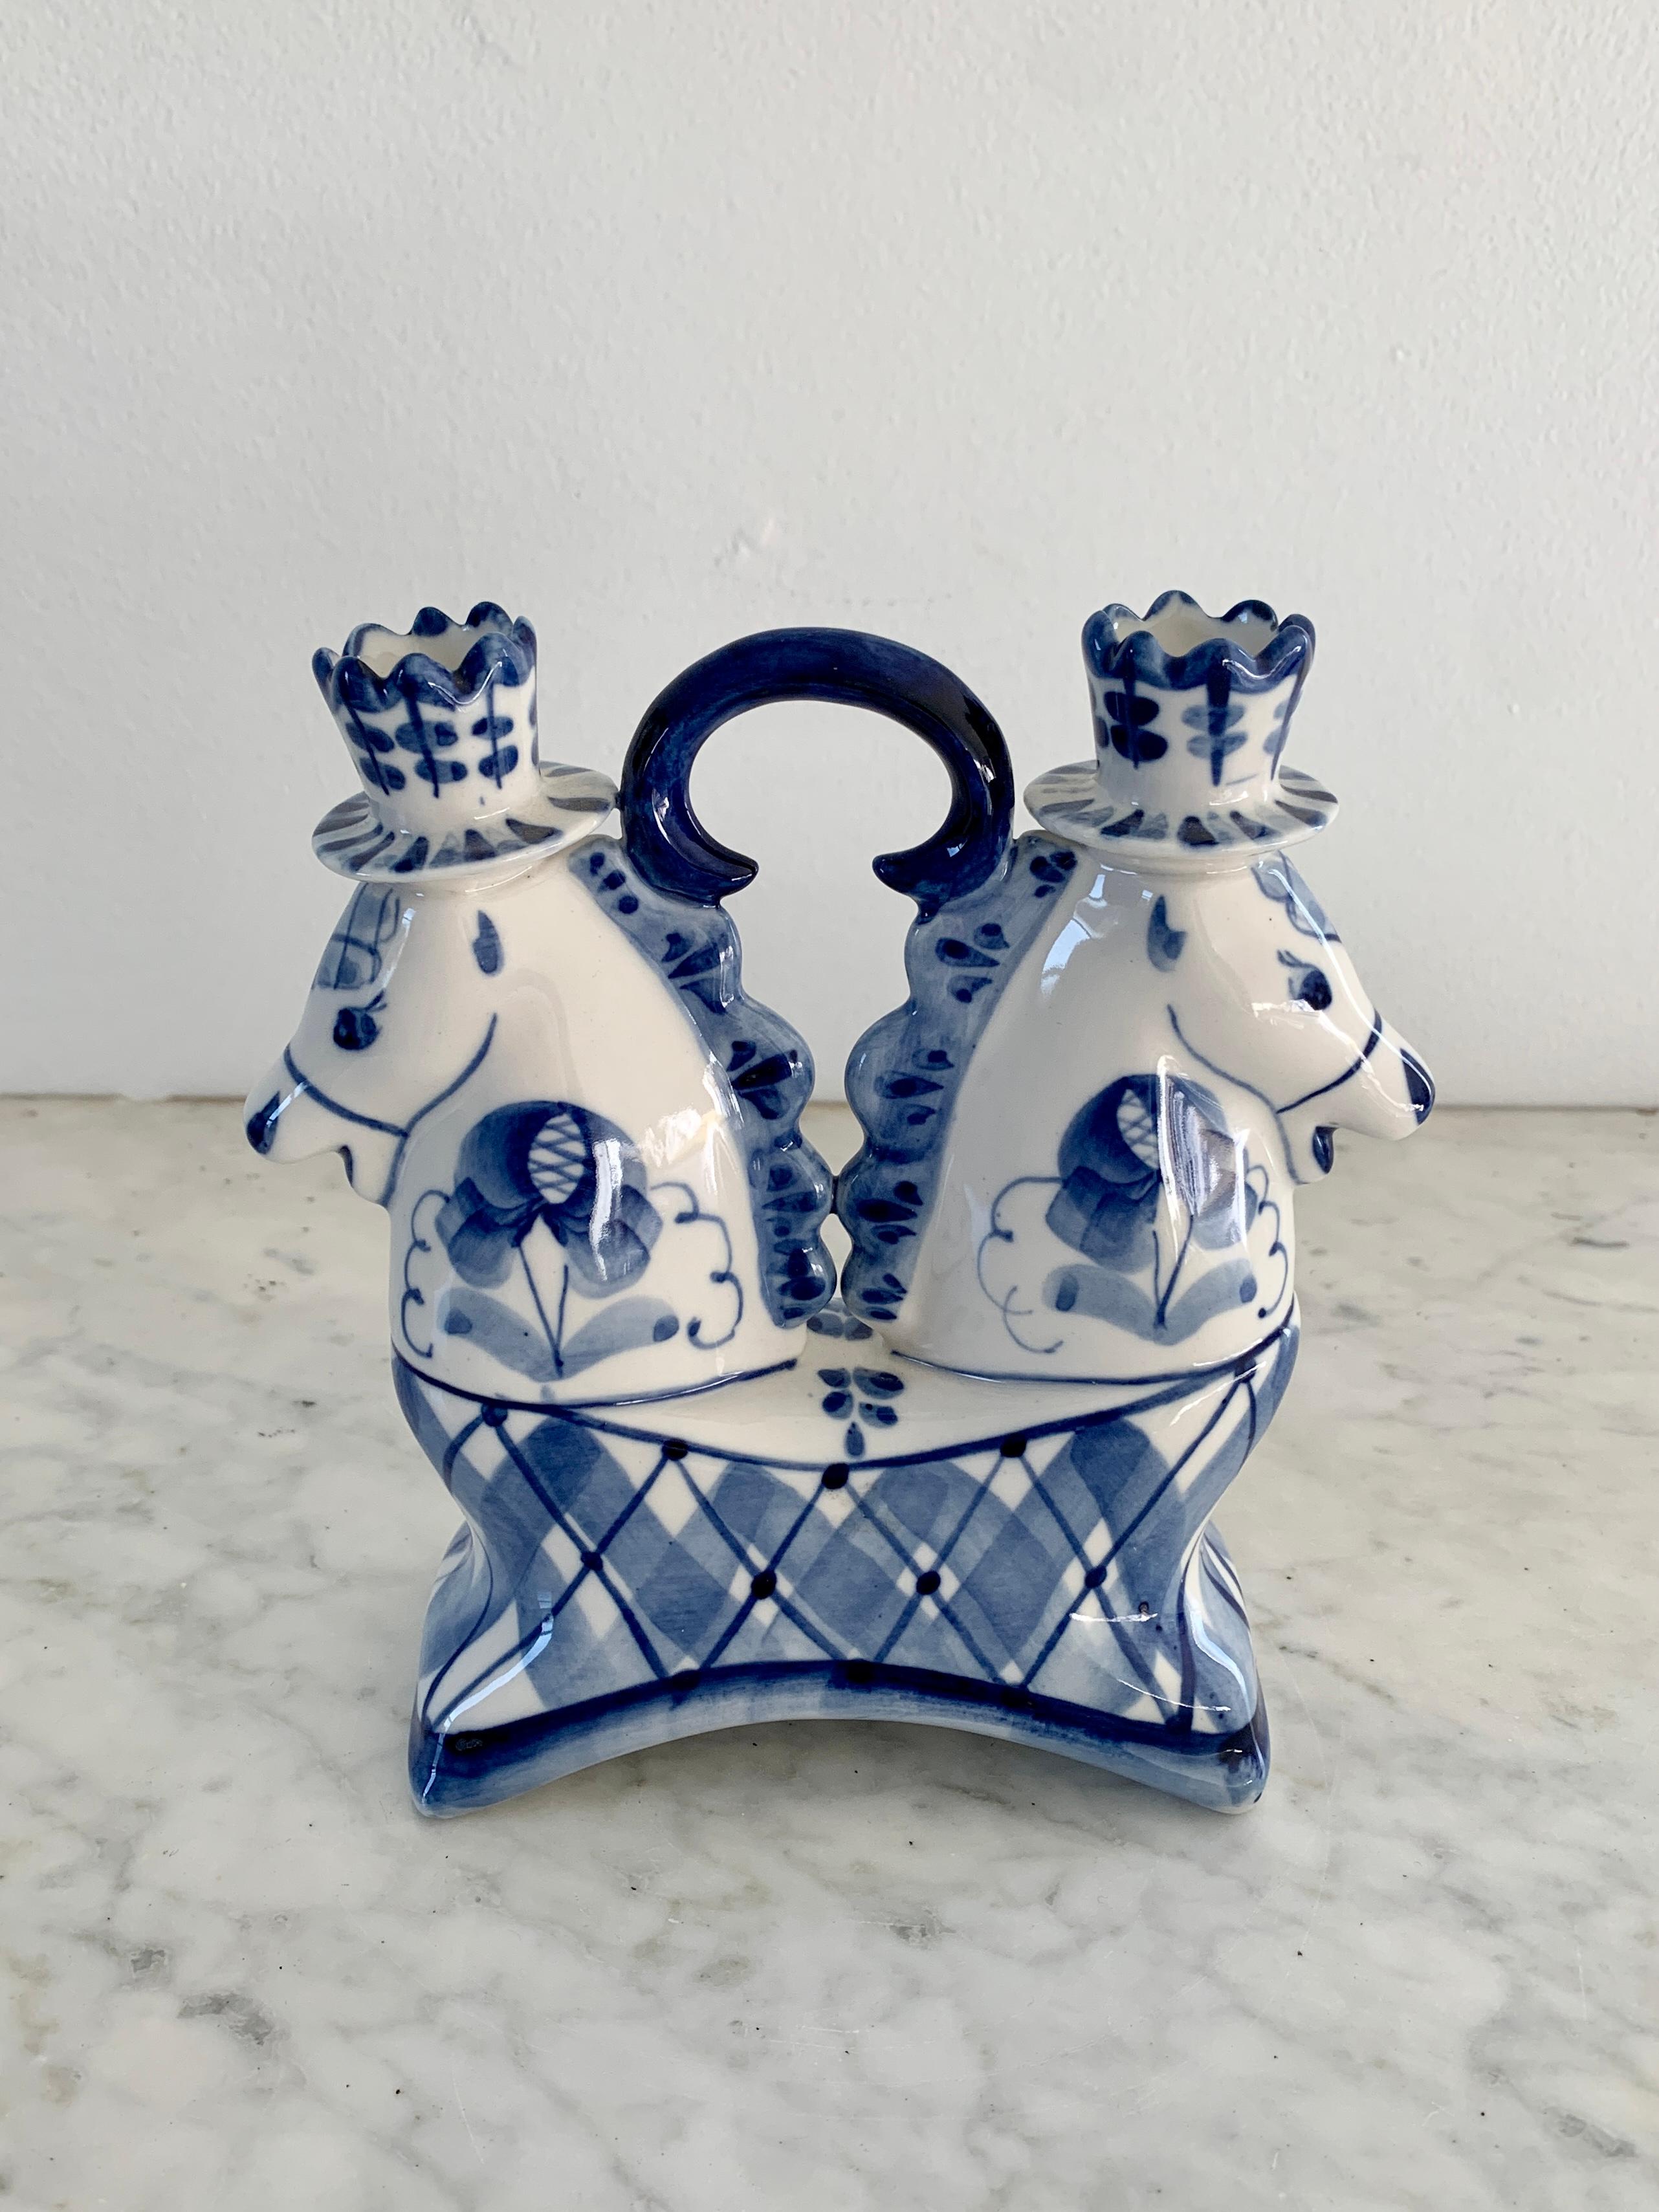 A wonderful blue and white porcelain double horse candle holder.

Russia, Late-20th Century

Measures: 6.5